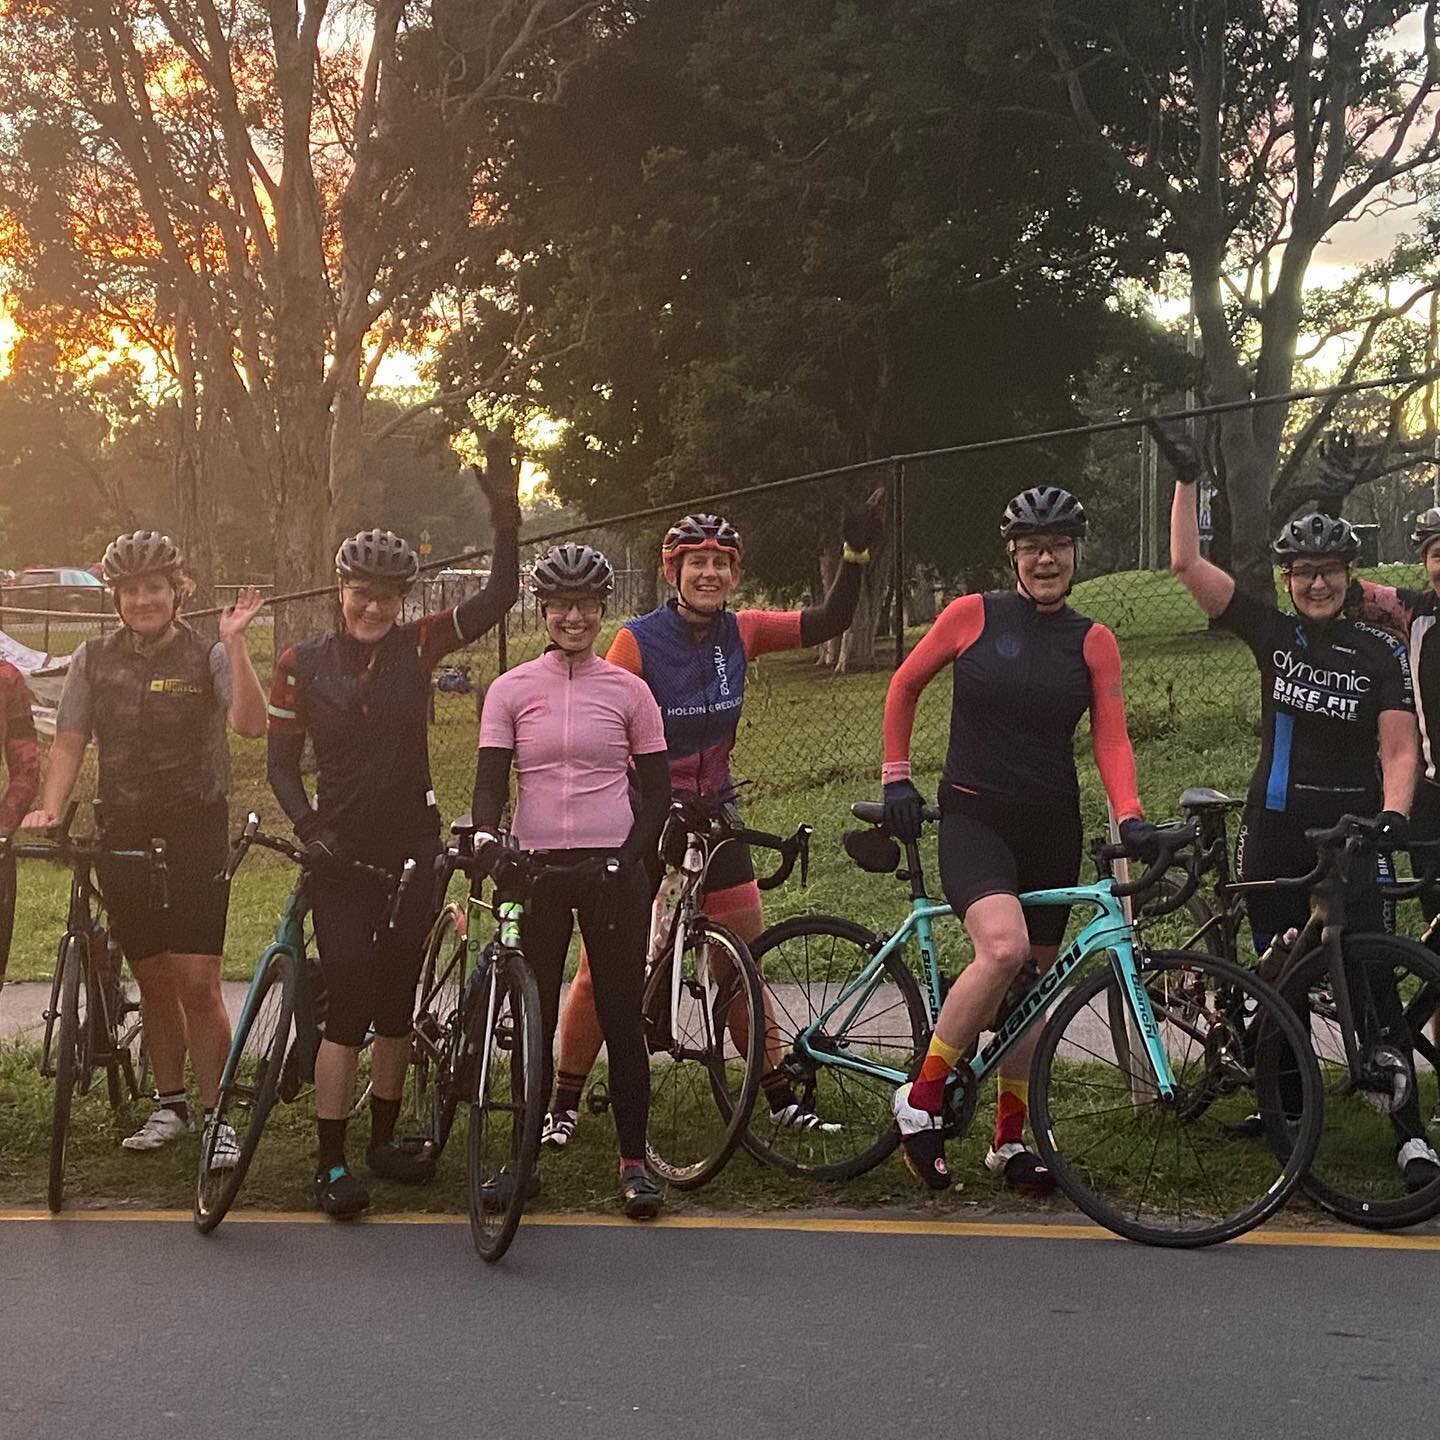 We all had a great session out on the Corso for our UQCC ladies&rsquo; training session. The girls killed it this morning!

We did some short efforts and busted a few foo foo valves in the process!*

Group training is a great way of connecting with l